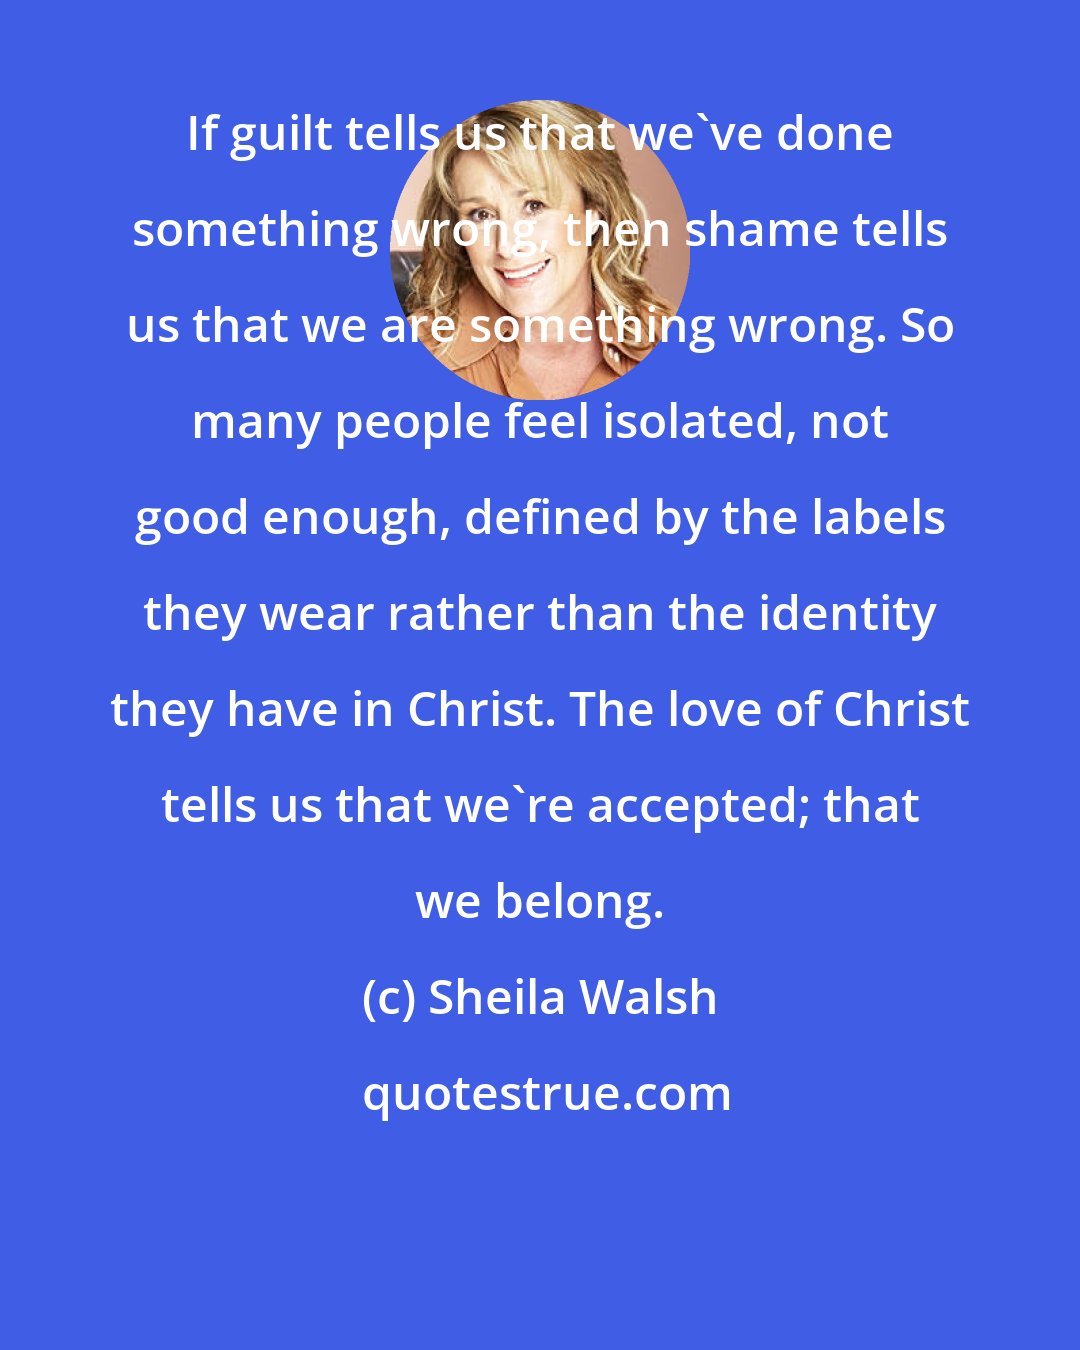 Sheila Walsh: If guilt tells us that we've done something wrong, then shame tells us that we are something wrong. So many people feel isolated, not good enough, defined by the labels they wear rather than the identity they have in Christ. The love of Christ tells us that we're accepted; that we belong.